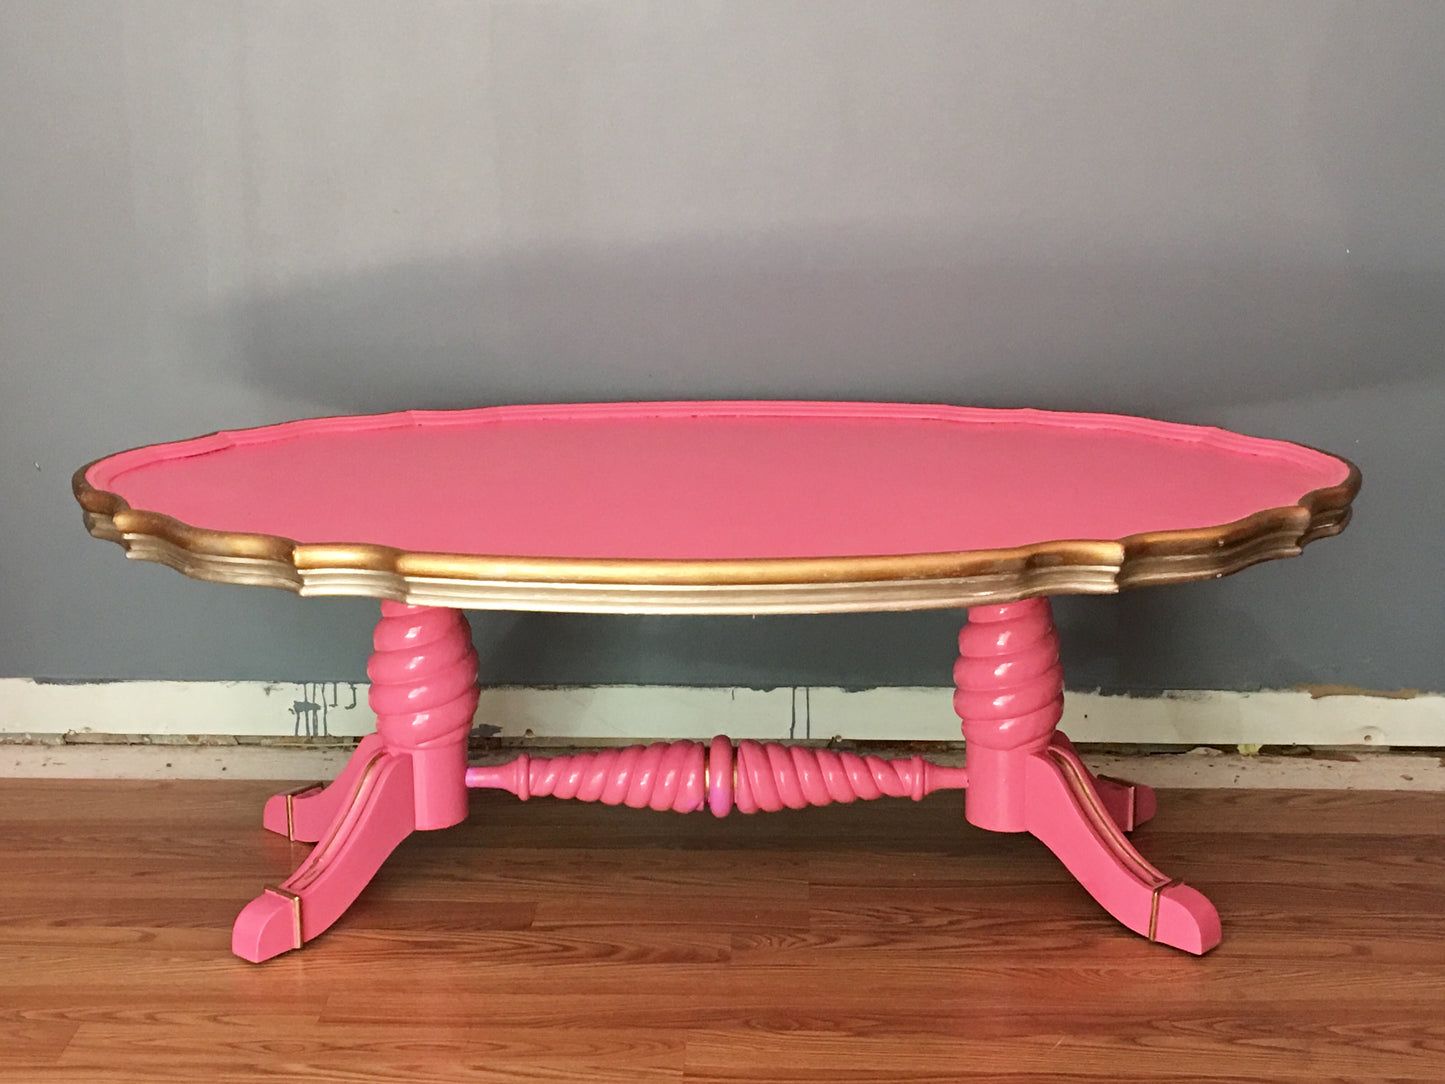 [SOLD] Deco Glam Hot Pink Lacquer Coffee Table